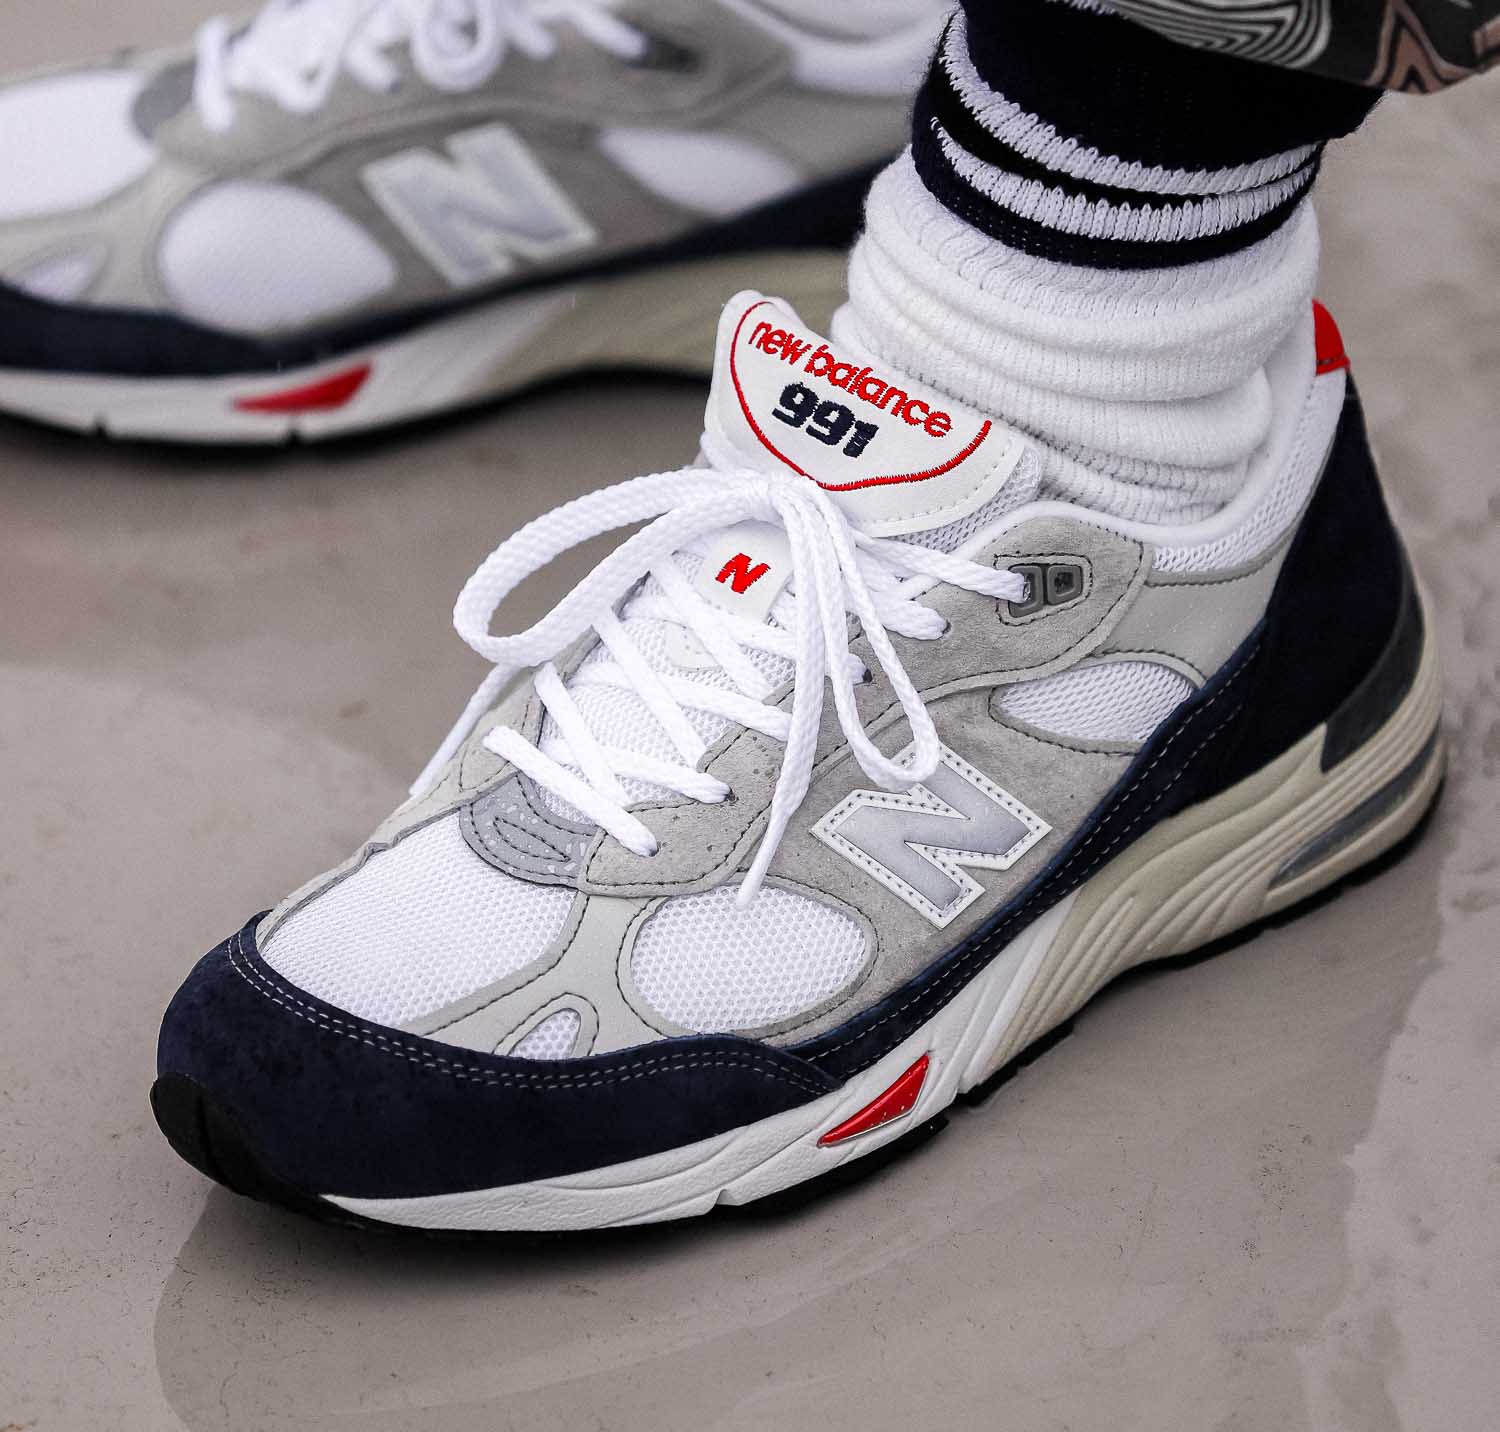 NEW BALANCE 991 - White Navy Red - Made In UK